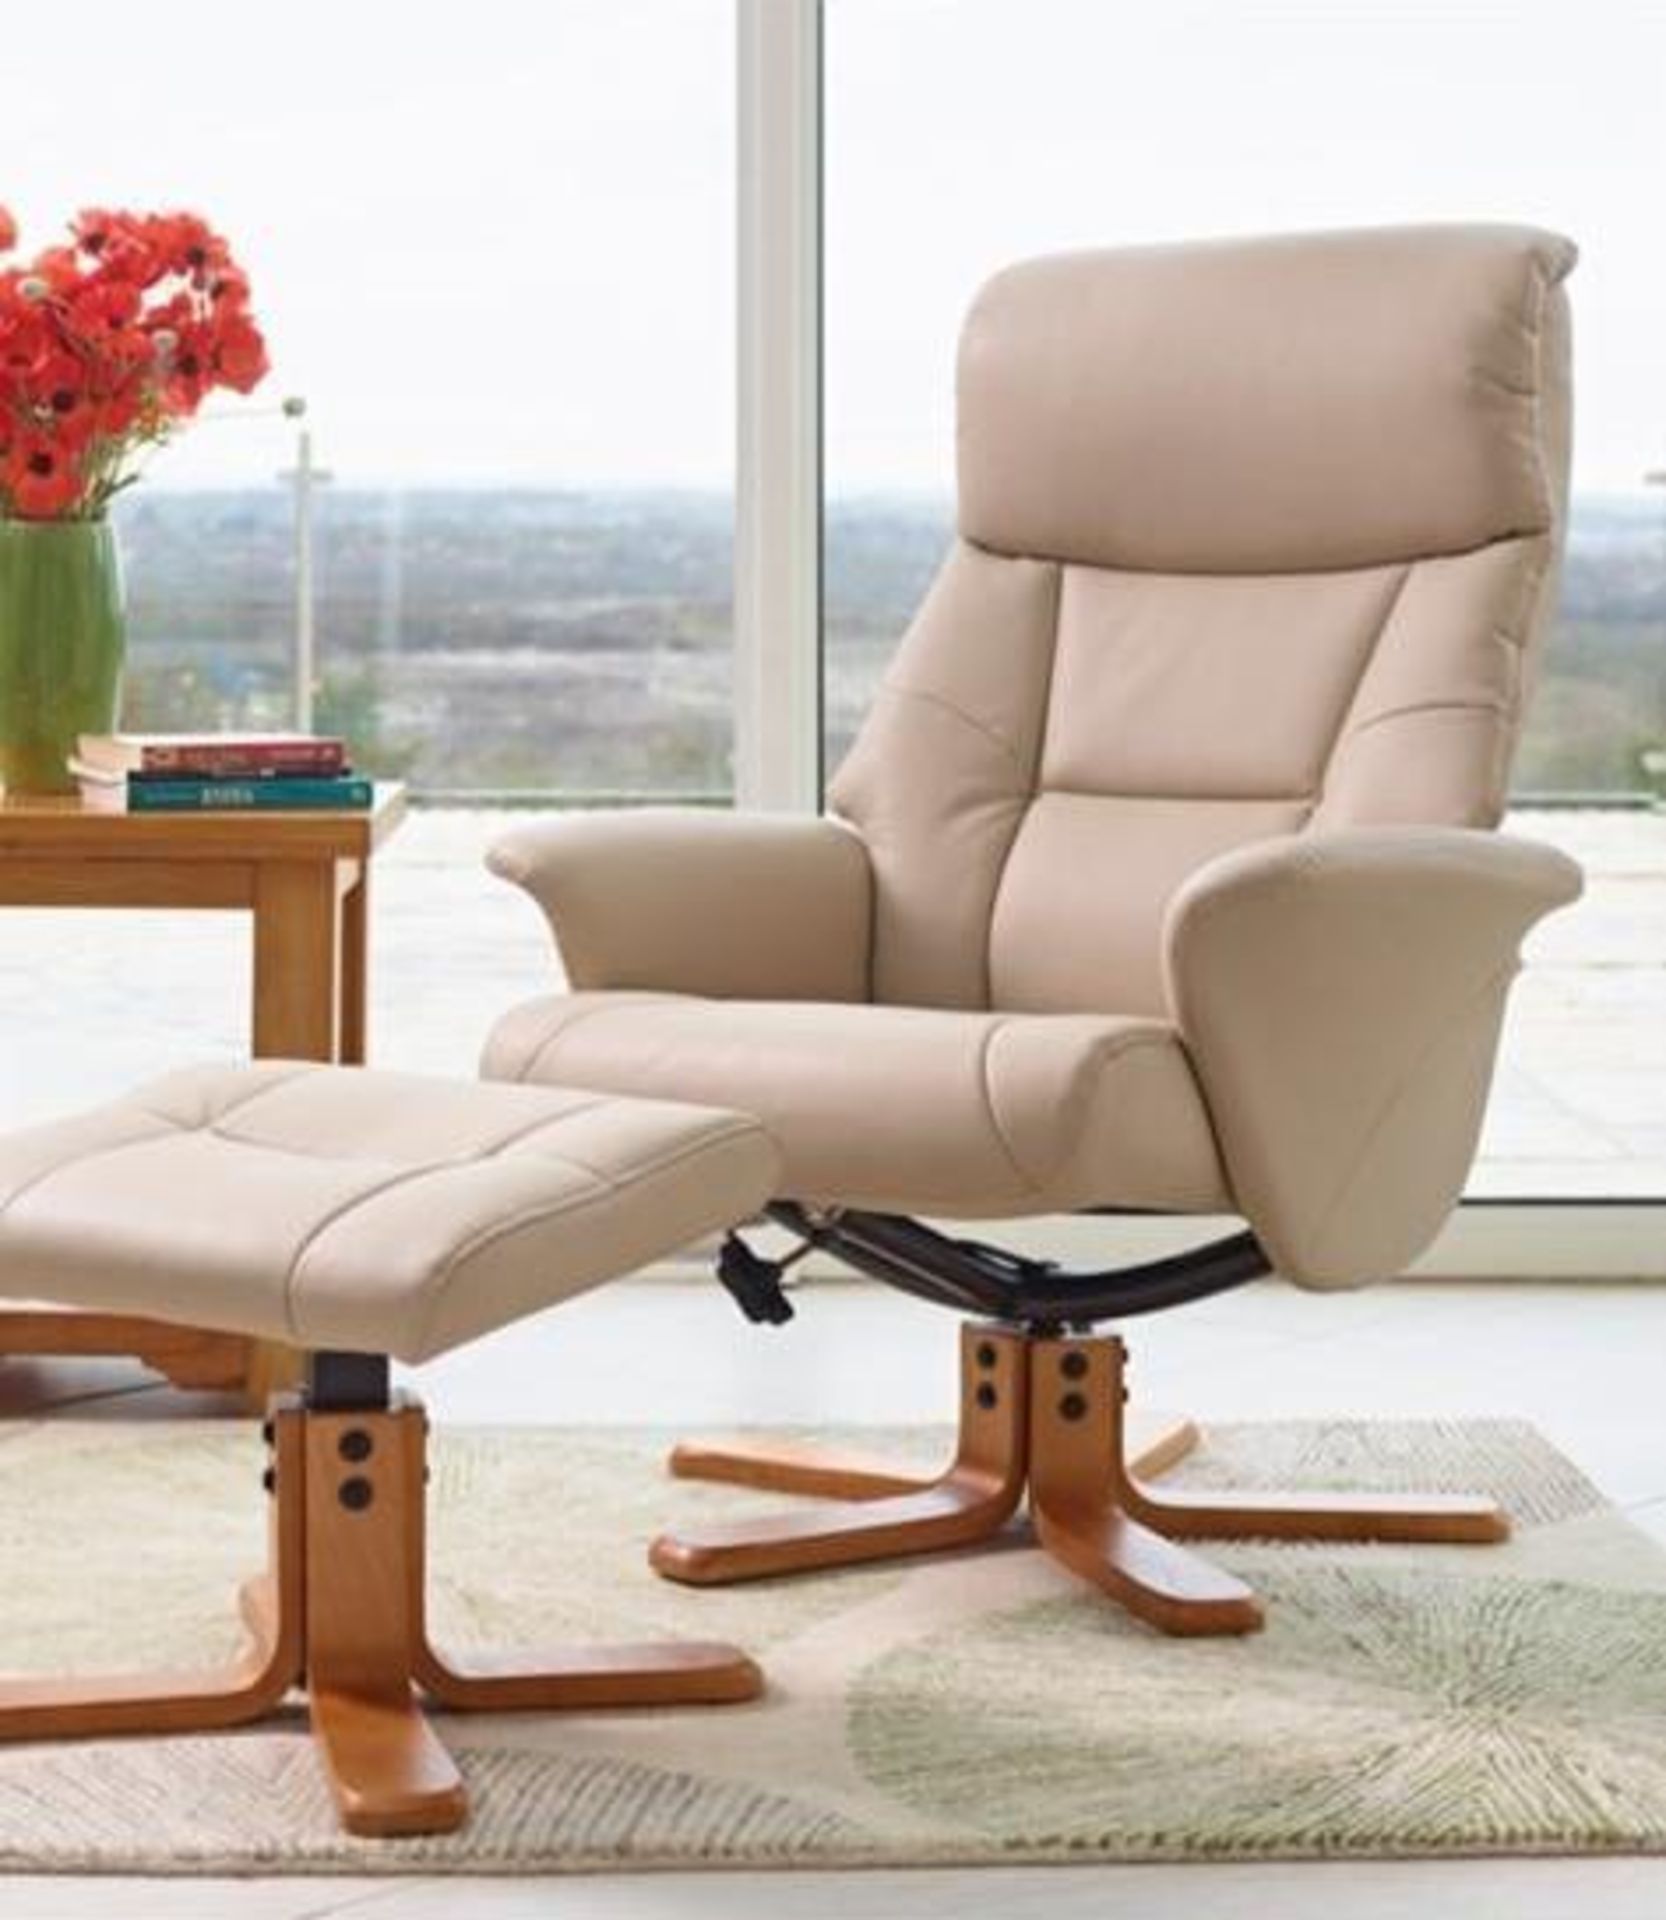 *TRADE LOT* 2 X BRAND NEW Florence swivel recliner and footstool cafe latte RRP: £549